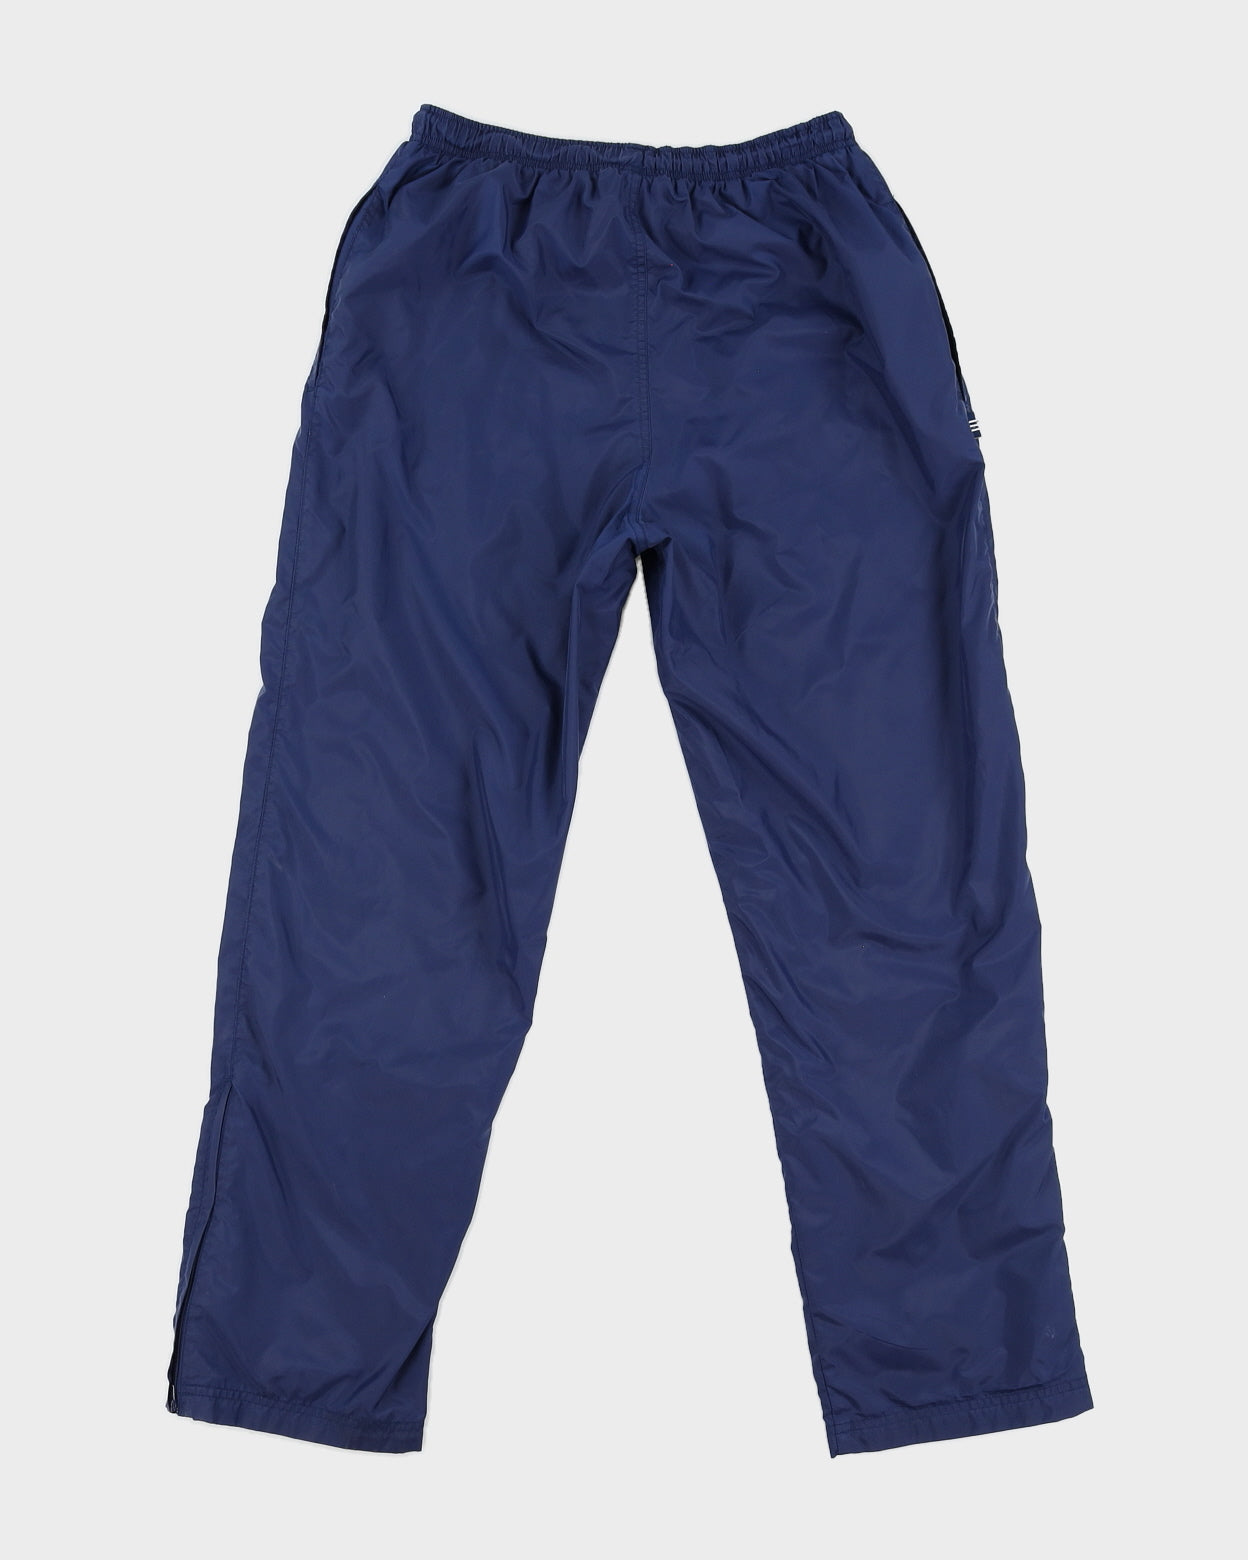 00s Adidas Blue Navy Tracksuit Bottoms - W32 L30